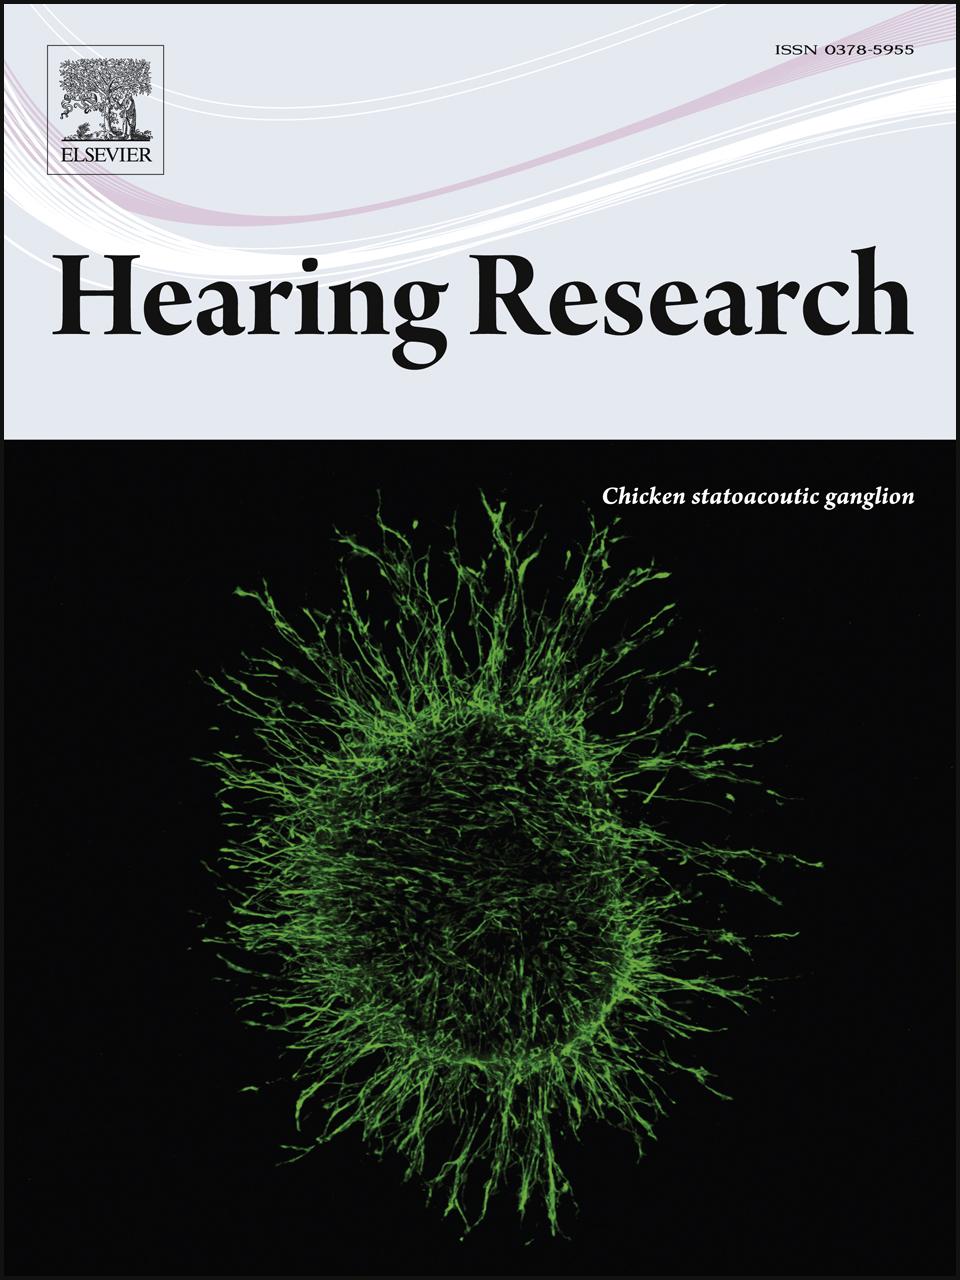 Accepted Manuscript Speech quality evaluation of a sparse coding shrinkage noise reduction algorithm with normal hearing and hearing impaired listeners Jinqiu Sang, Hongmei Hu, Chengshi Zheng,